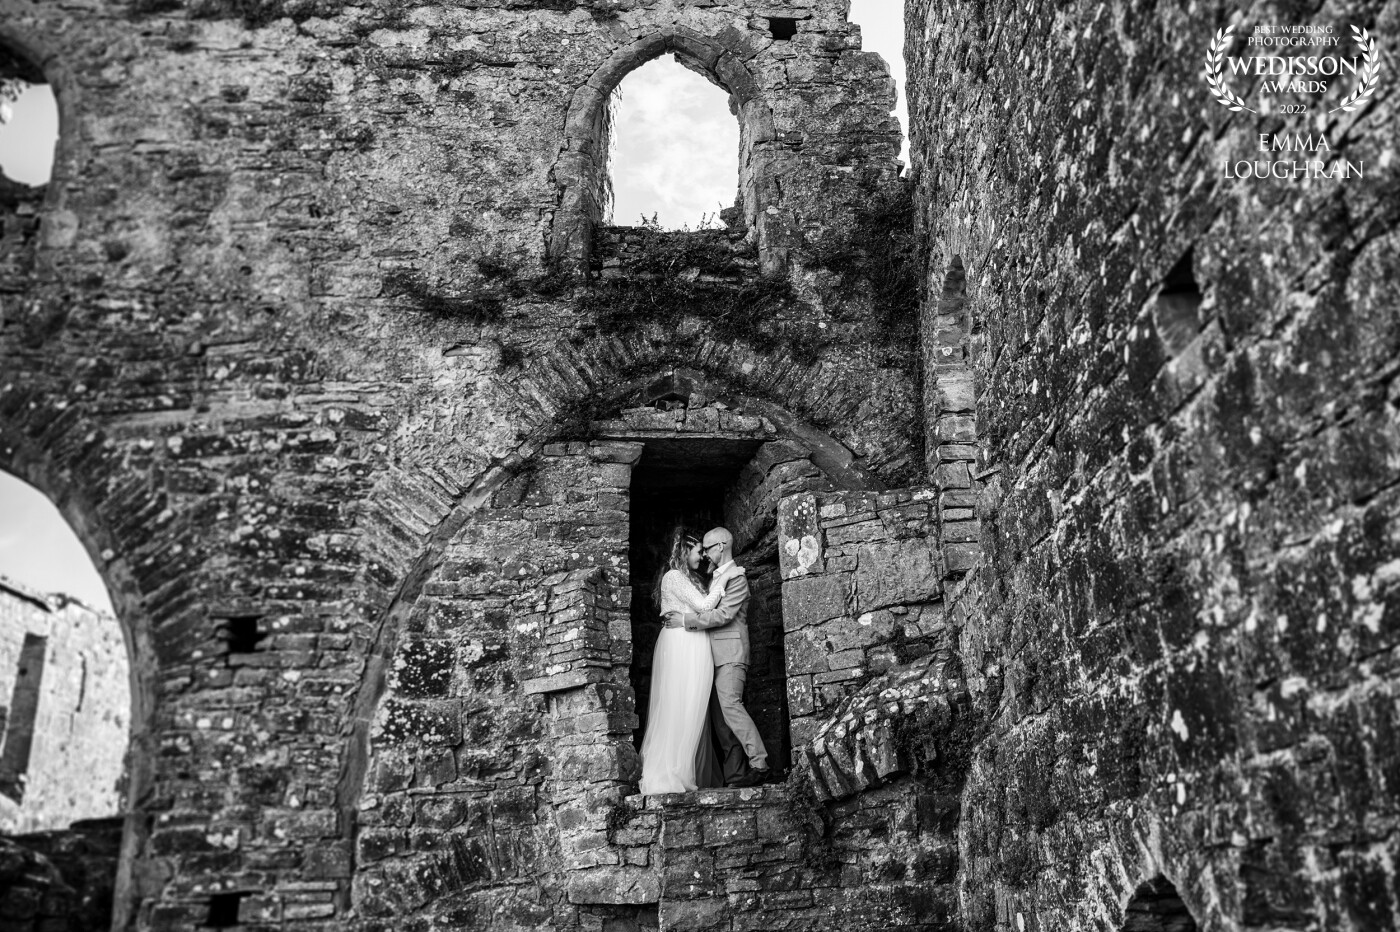 This photo was taken in an 11th century ruin of an Abbey which once housed the King of Meath and featured prominently in the film Braveheart. It also holds sentimental value to the bride as she and her family used to visit it as a child so it was an excellent choice for their wedding photos.